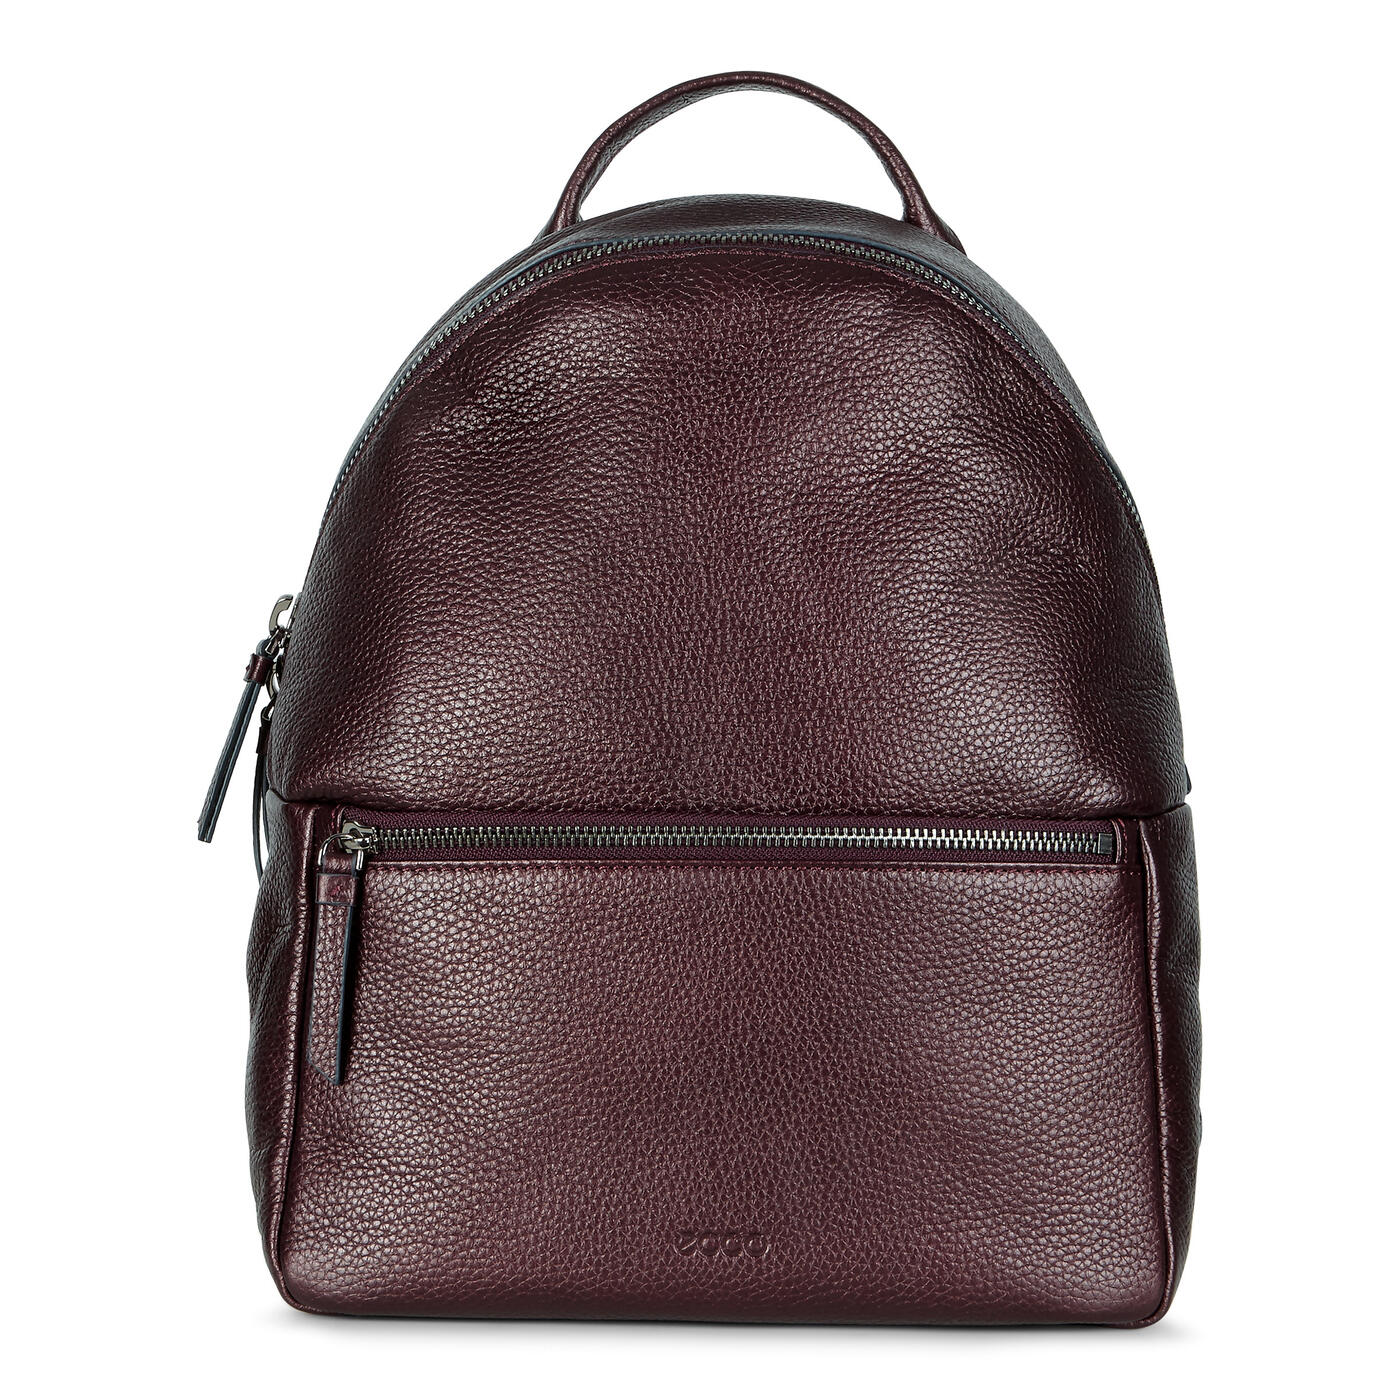 ECCO SP 3 Backpack | Official ECCO® Store